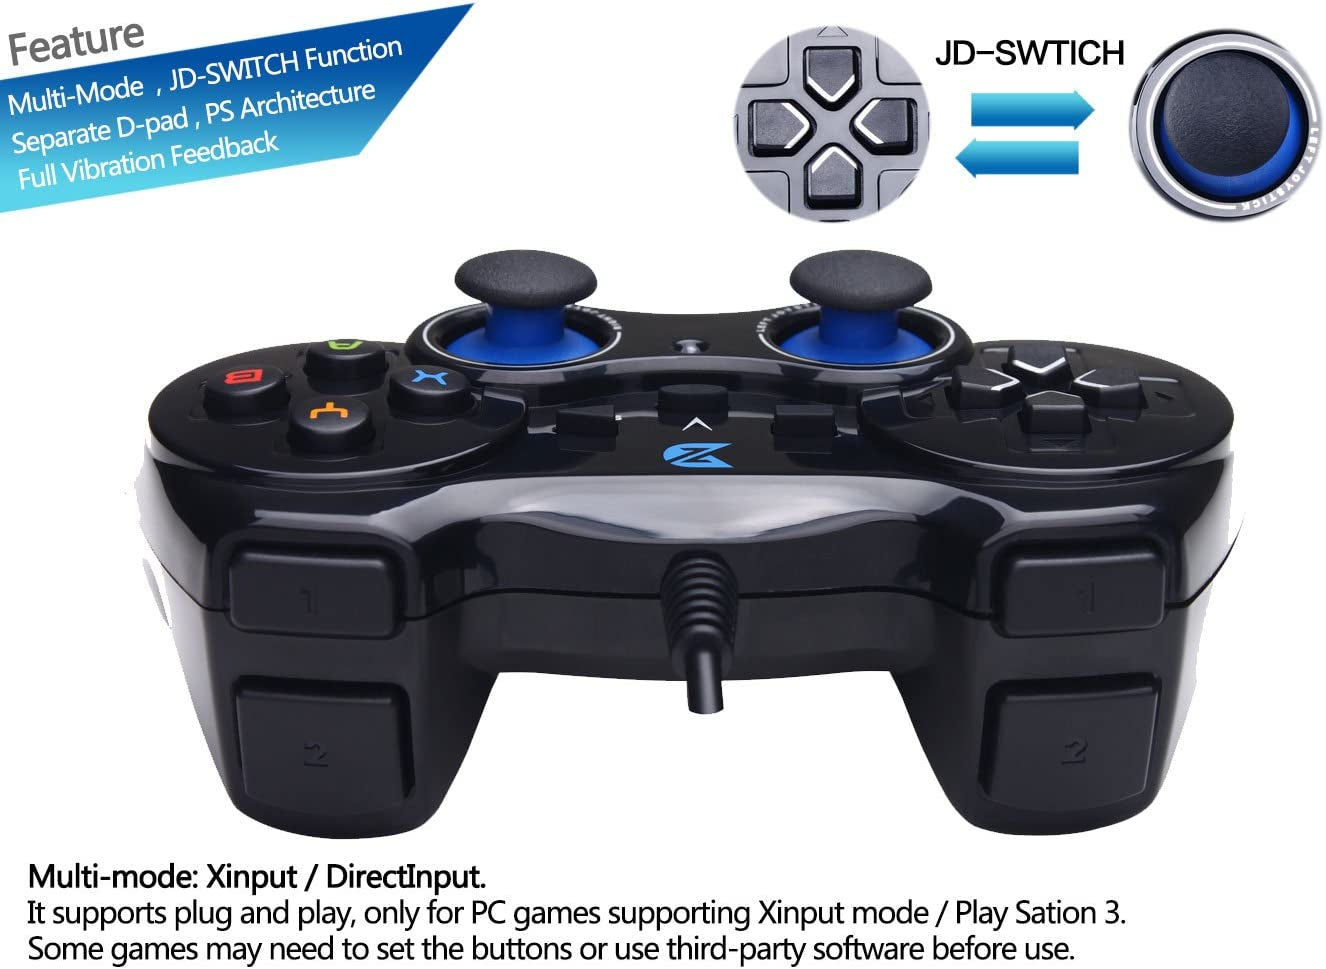 USB Wired Gaming Controller Gamepad for PC/Laptop (Windows XP/7/8/10/11) & PS3 & Android & Steam - Black